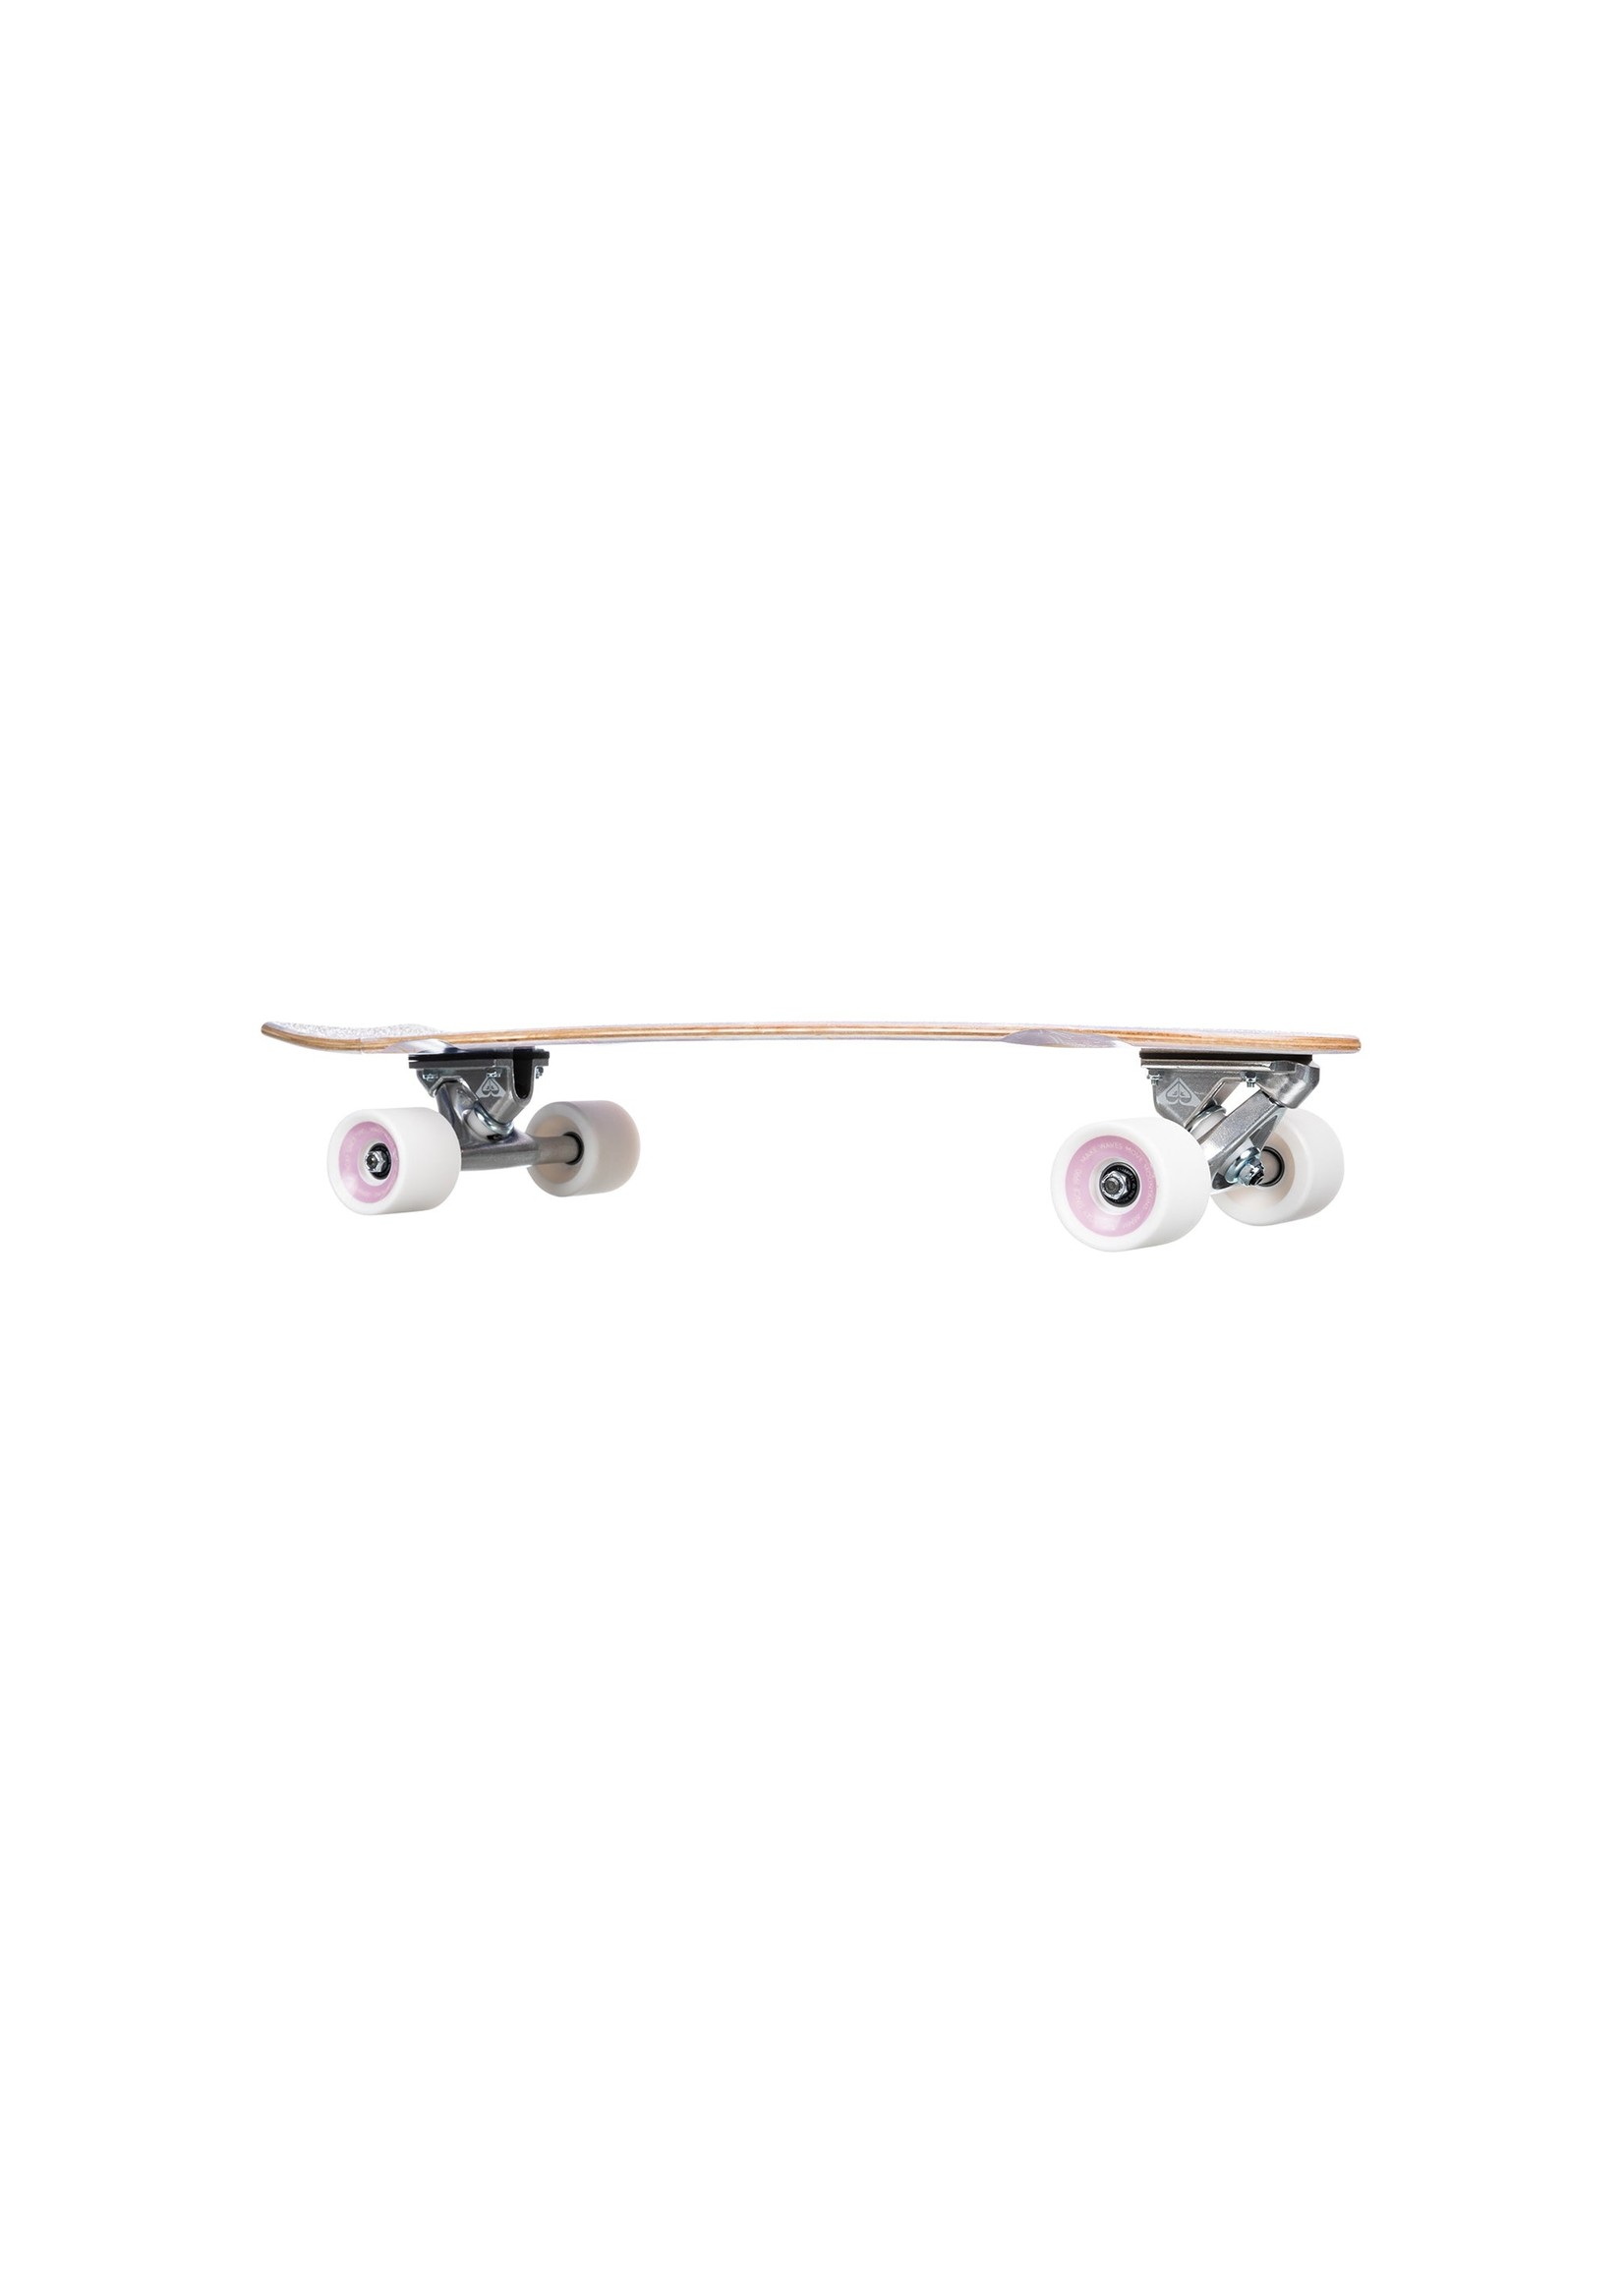 Quiksilver Roxy Complete Surfskate Dawn